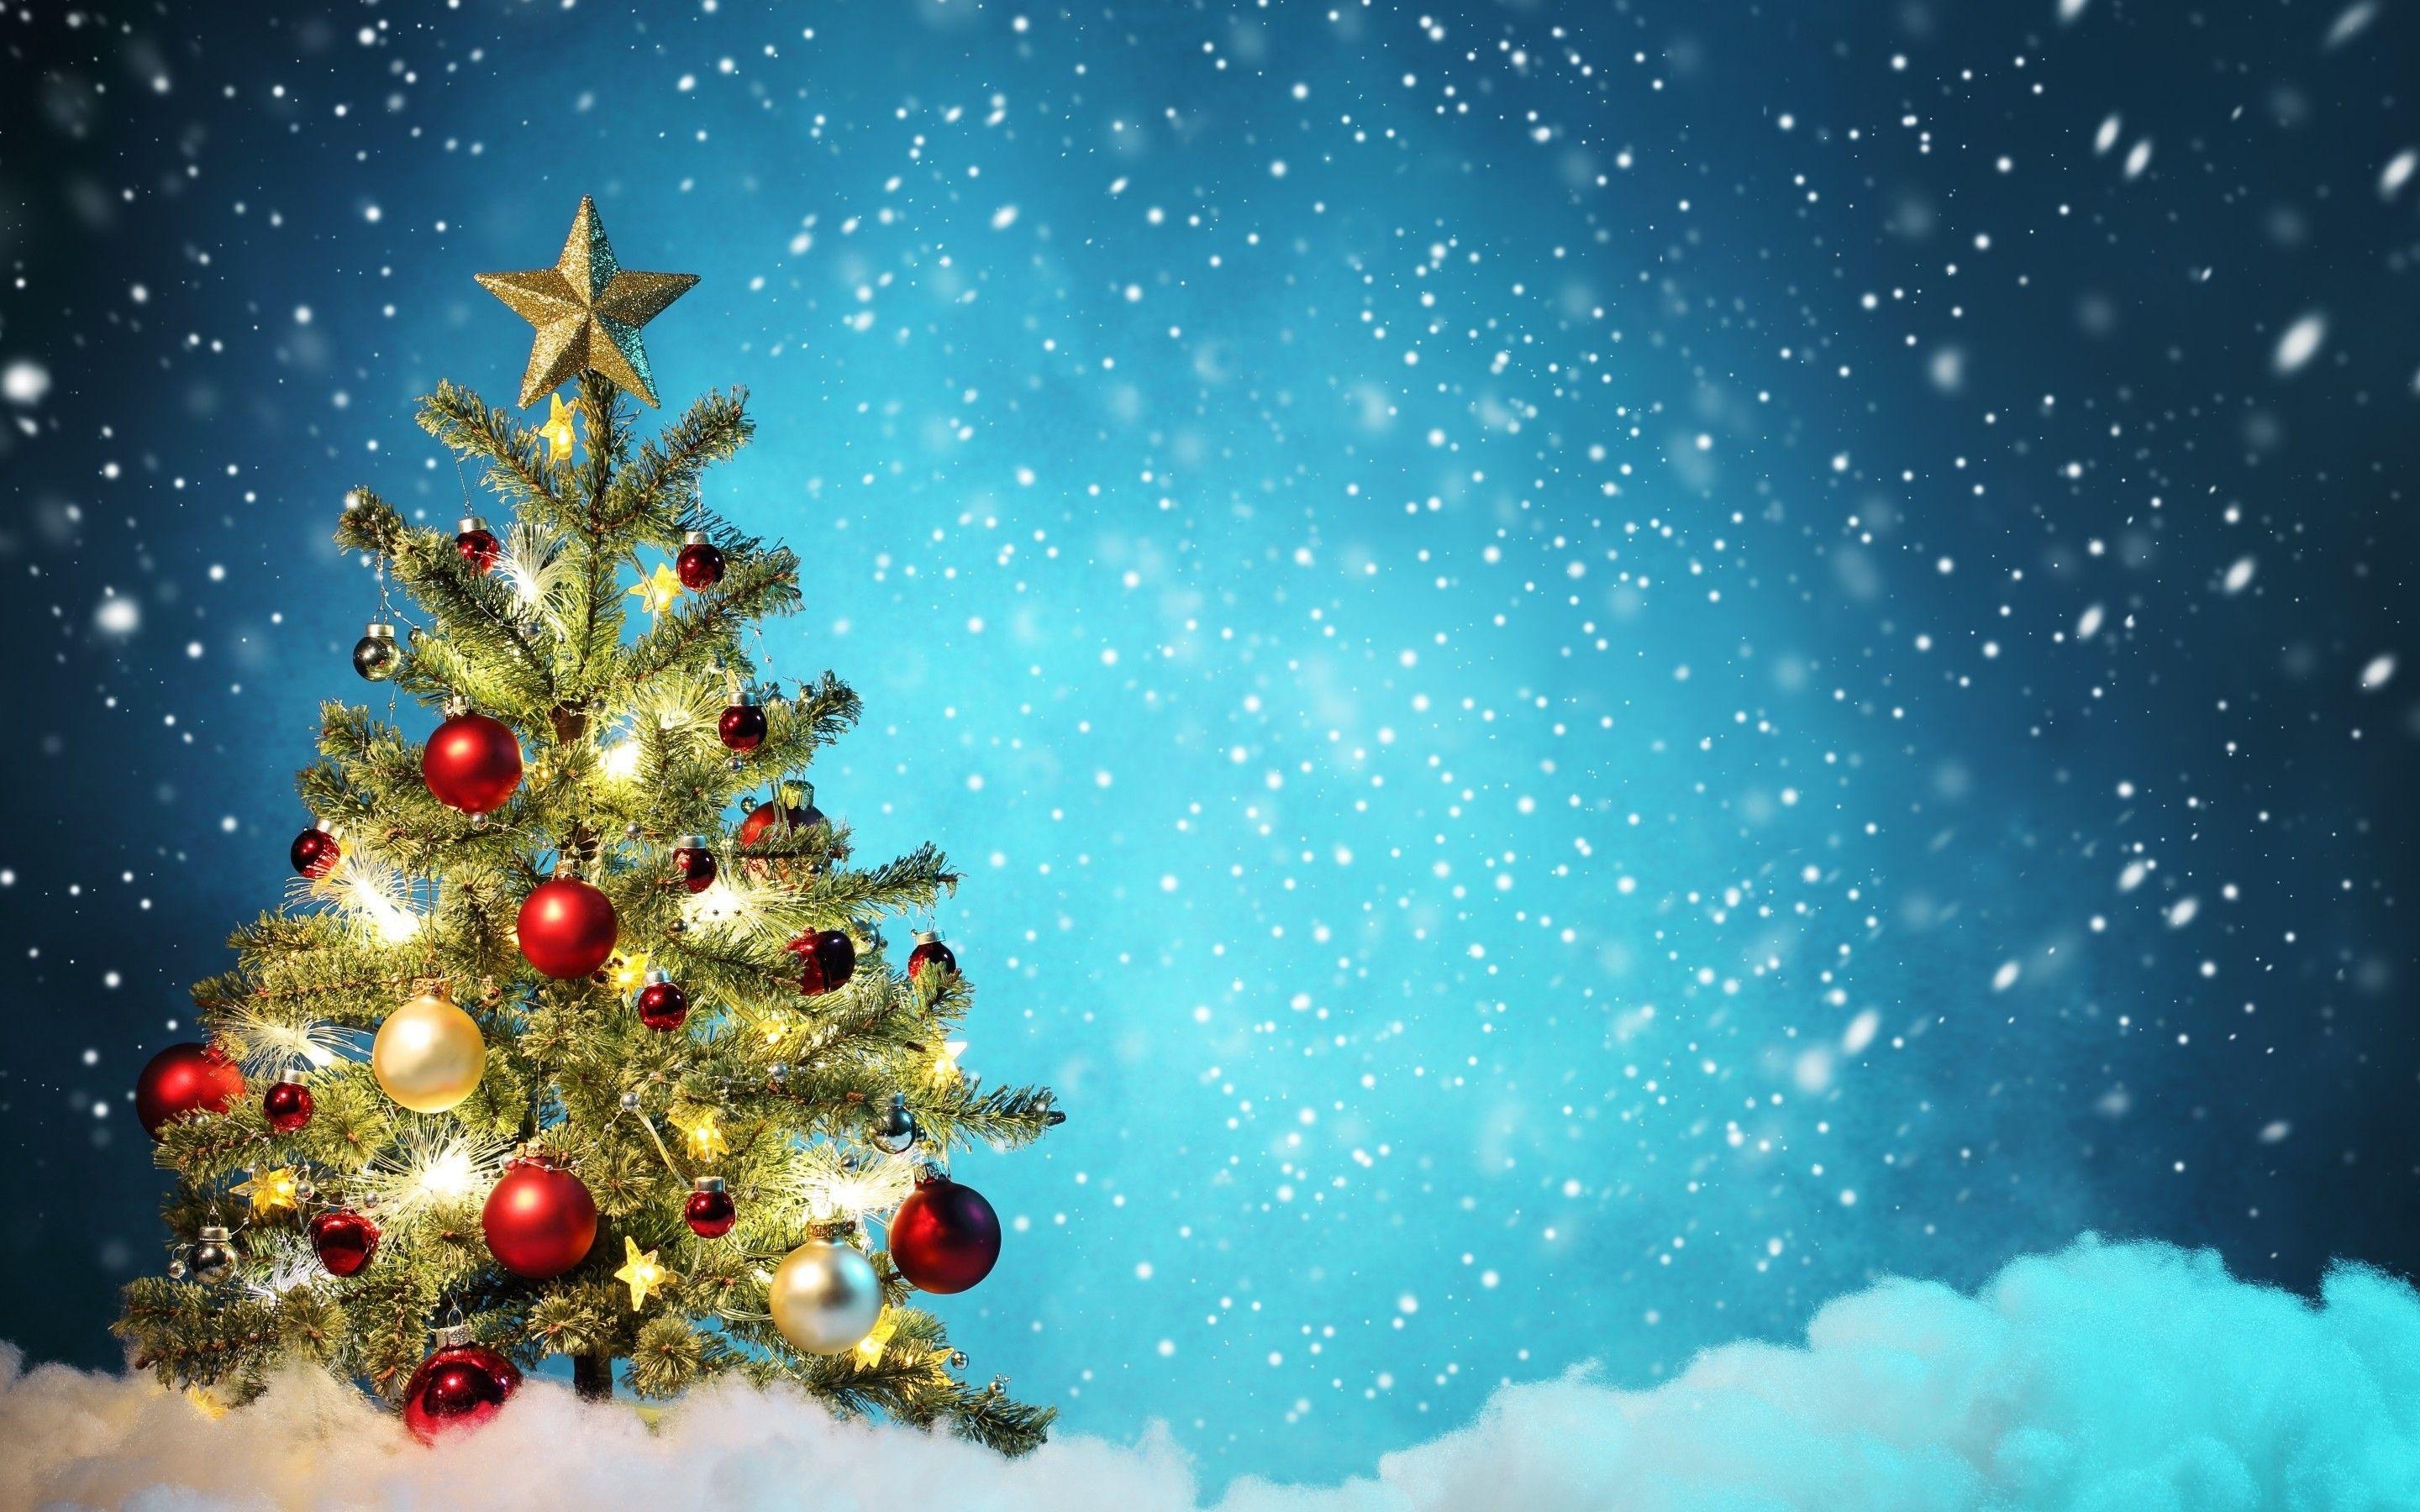 Christmas Night Live Wallpaper - Apps on Google Play